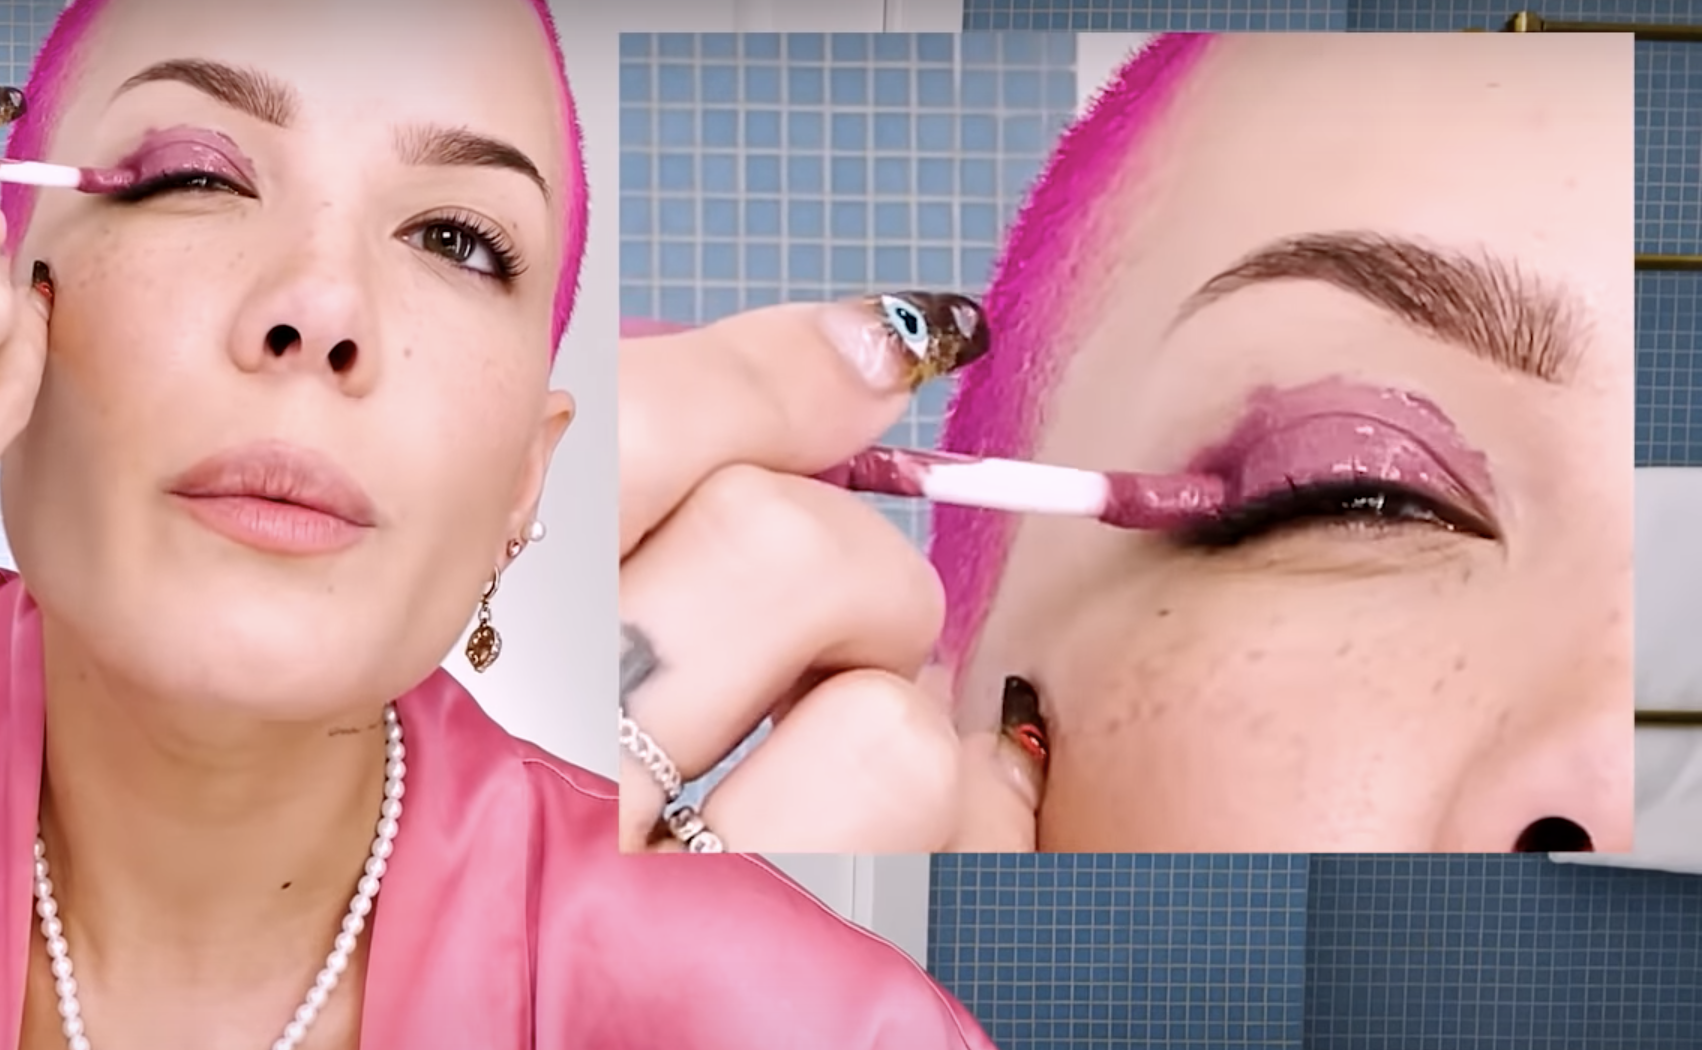 Halsey About-Face Beauty Review